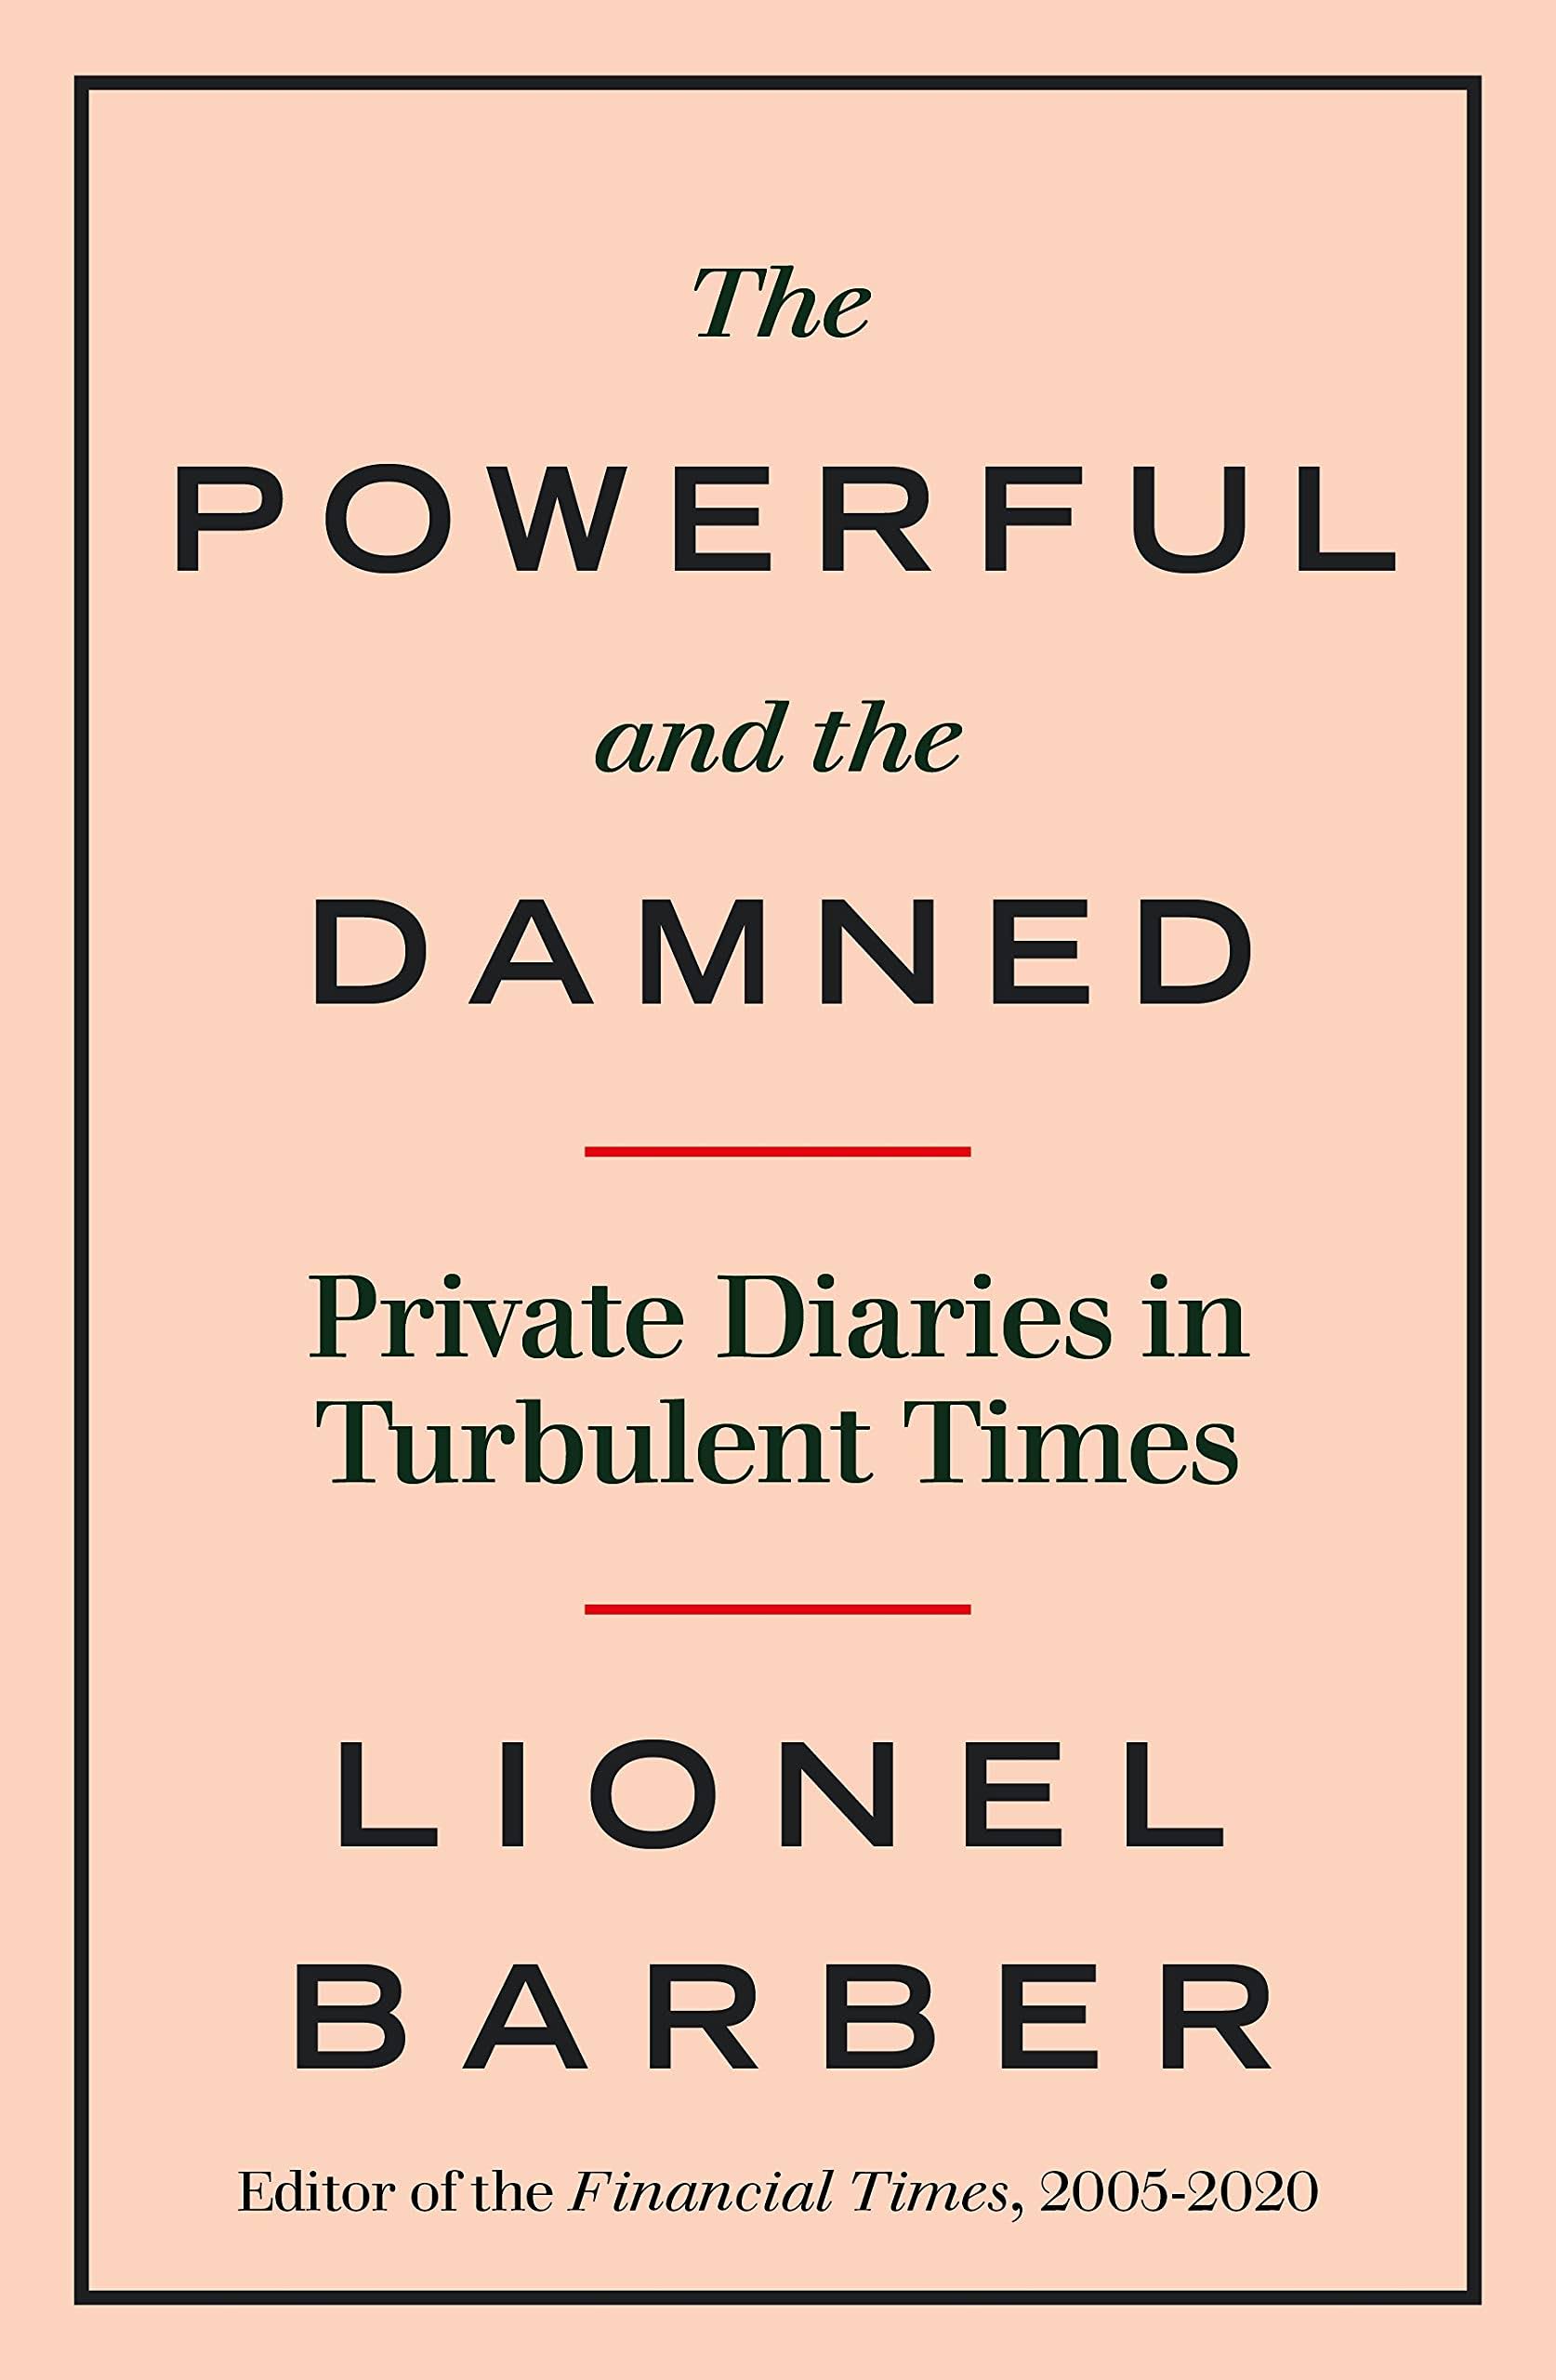 The Powerful and the Damned: Private Diaries in Turbulent Times [Book]